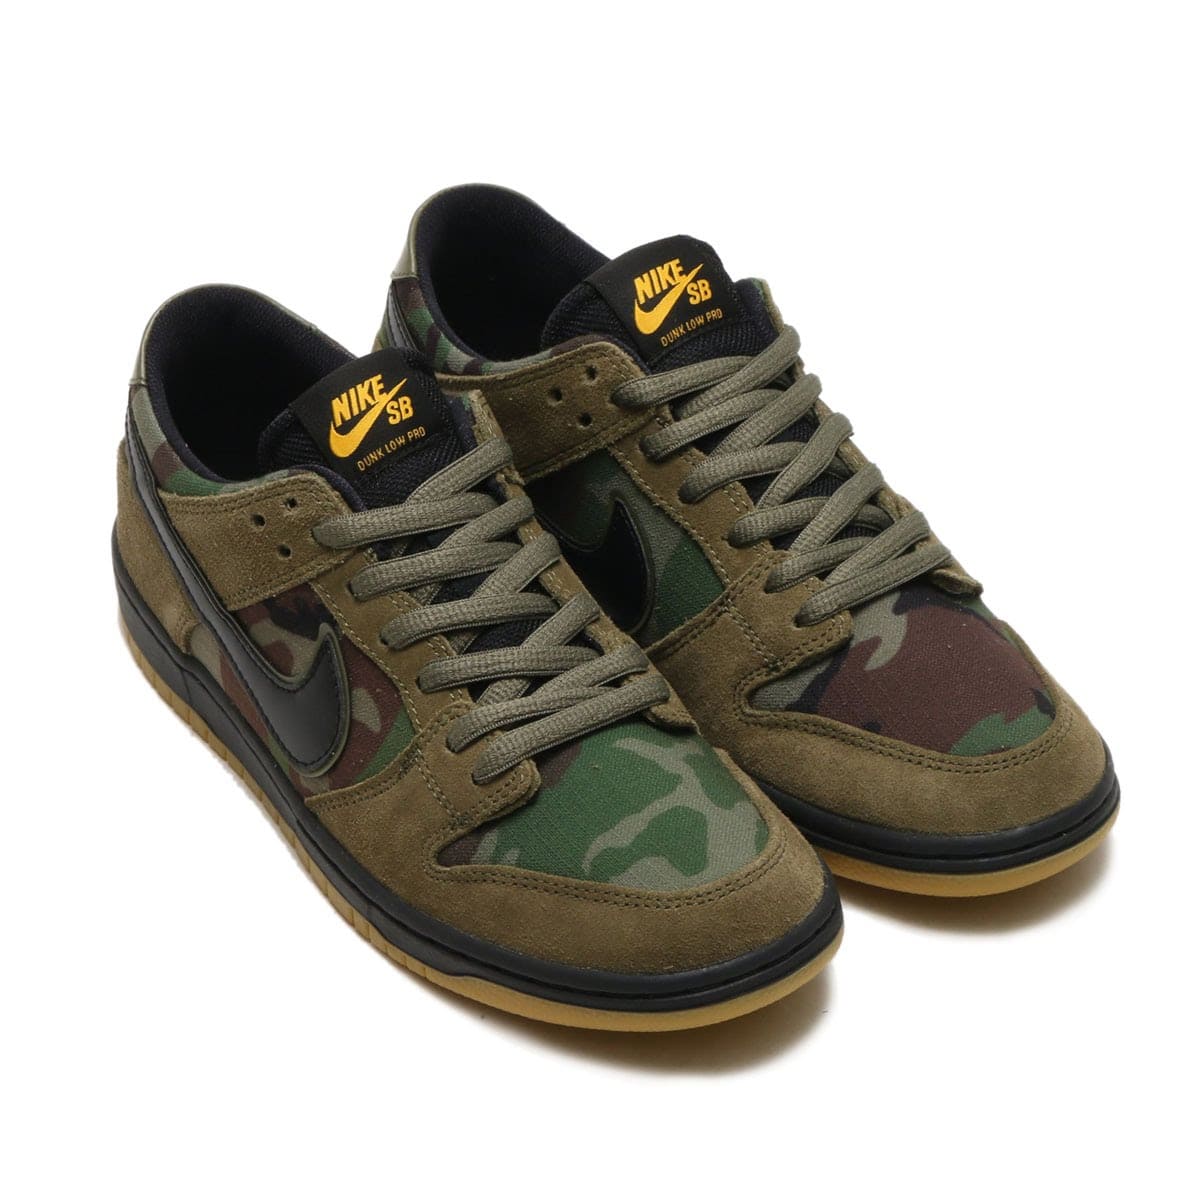 nike dunk low olive